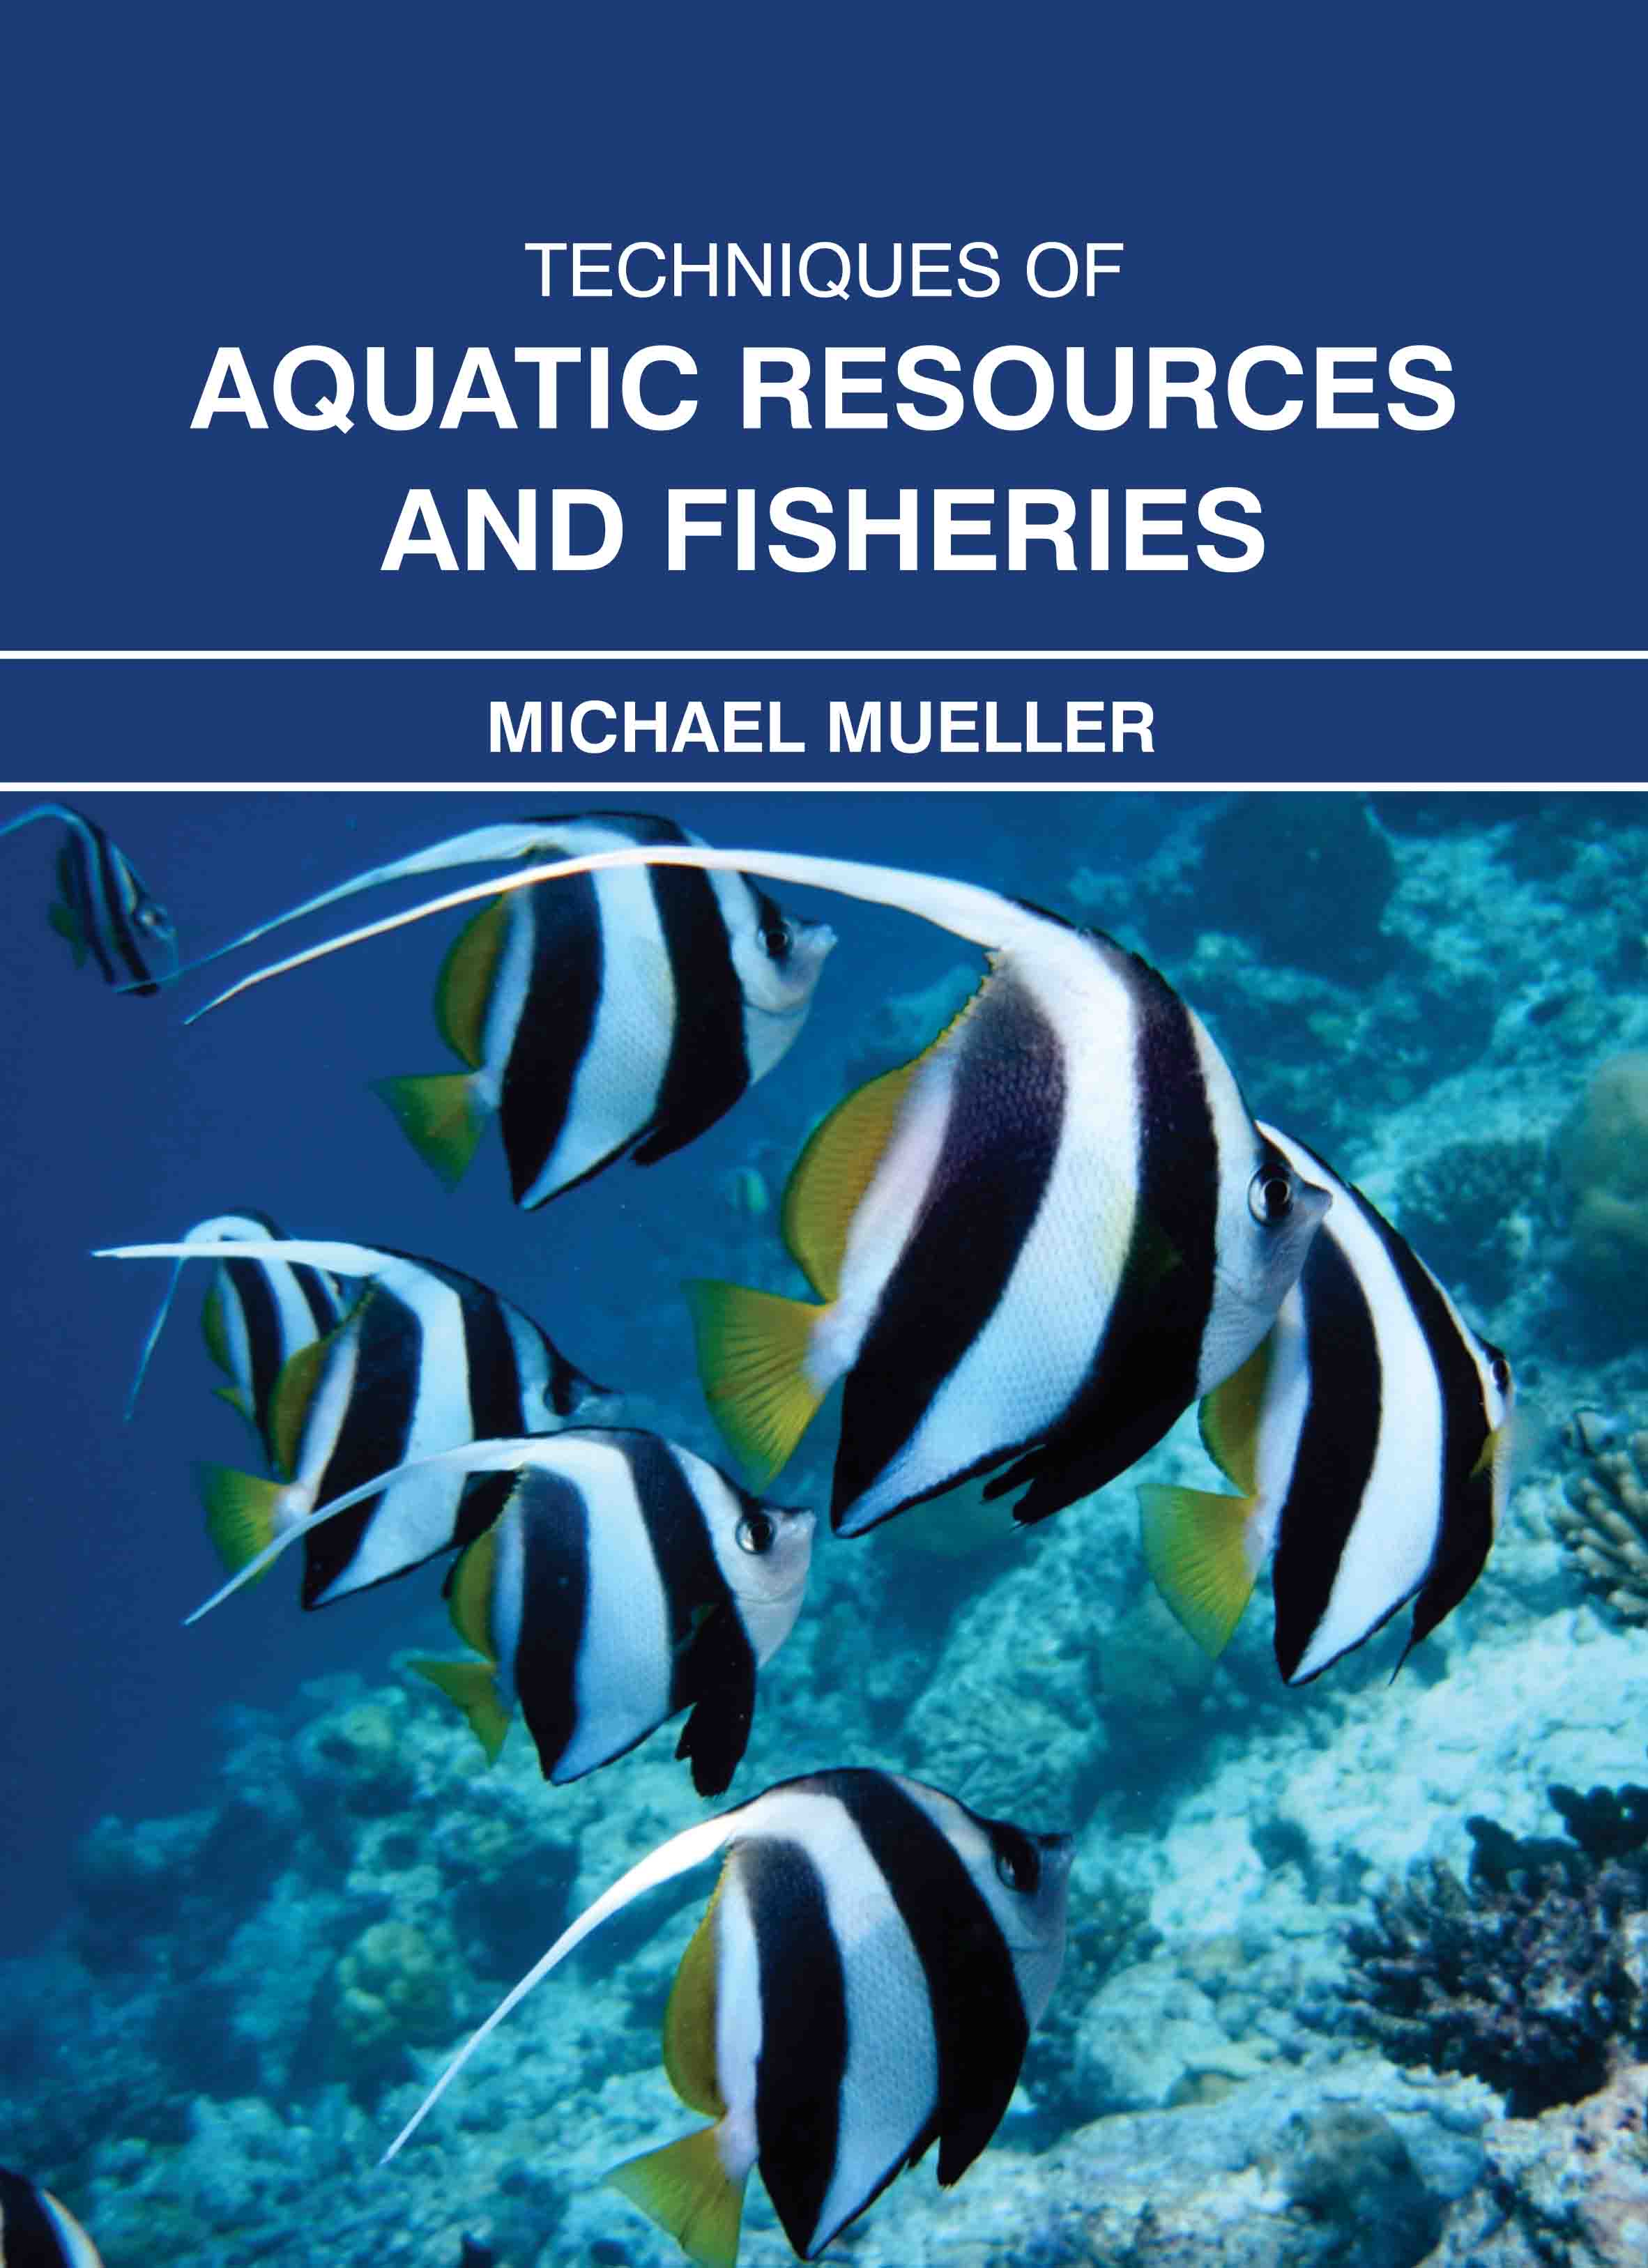 Techniques of Aquatic Resources and Fisheries